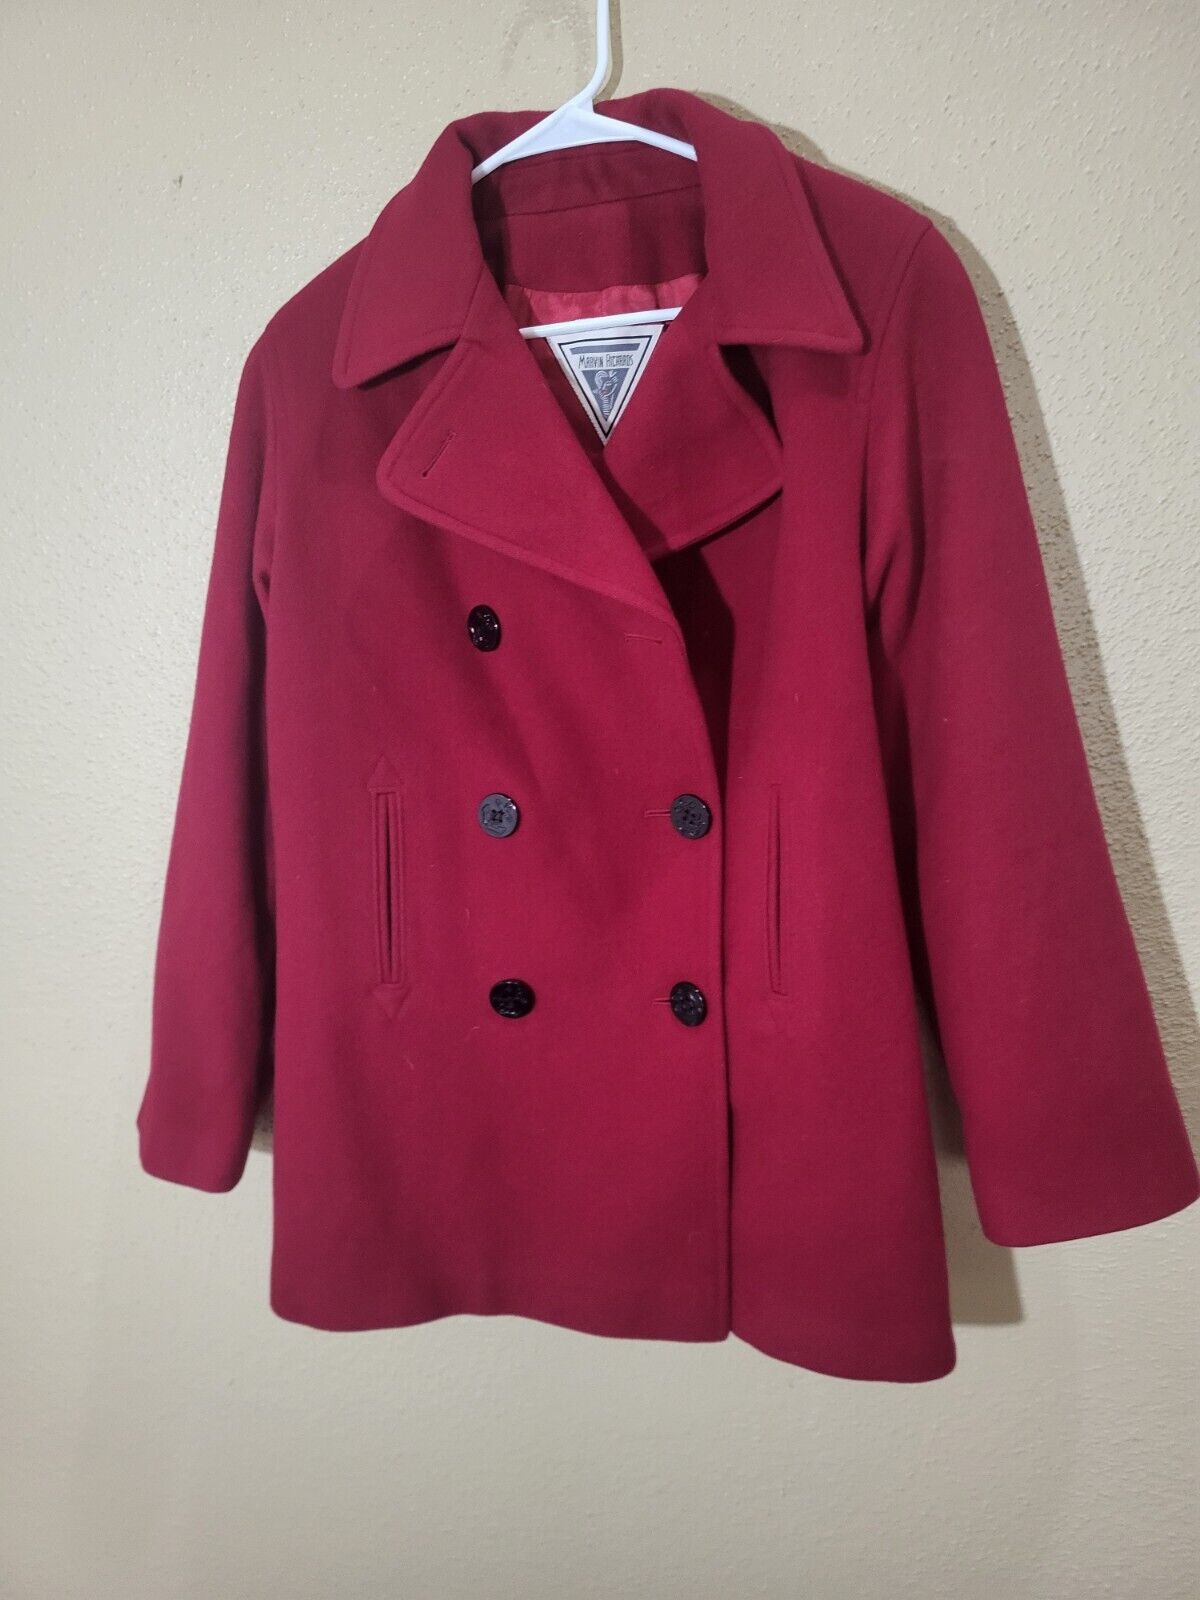 Marvin Richards Women\'s Red Wool Coat. Size 8,Cond.is Very Good.